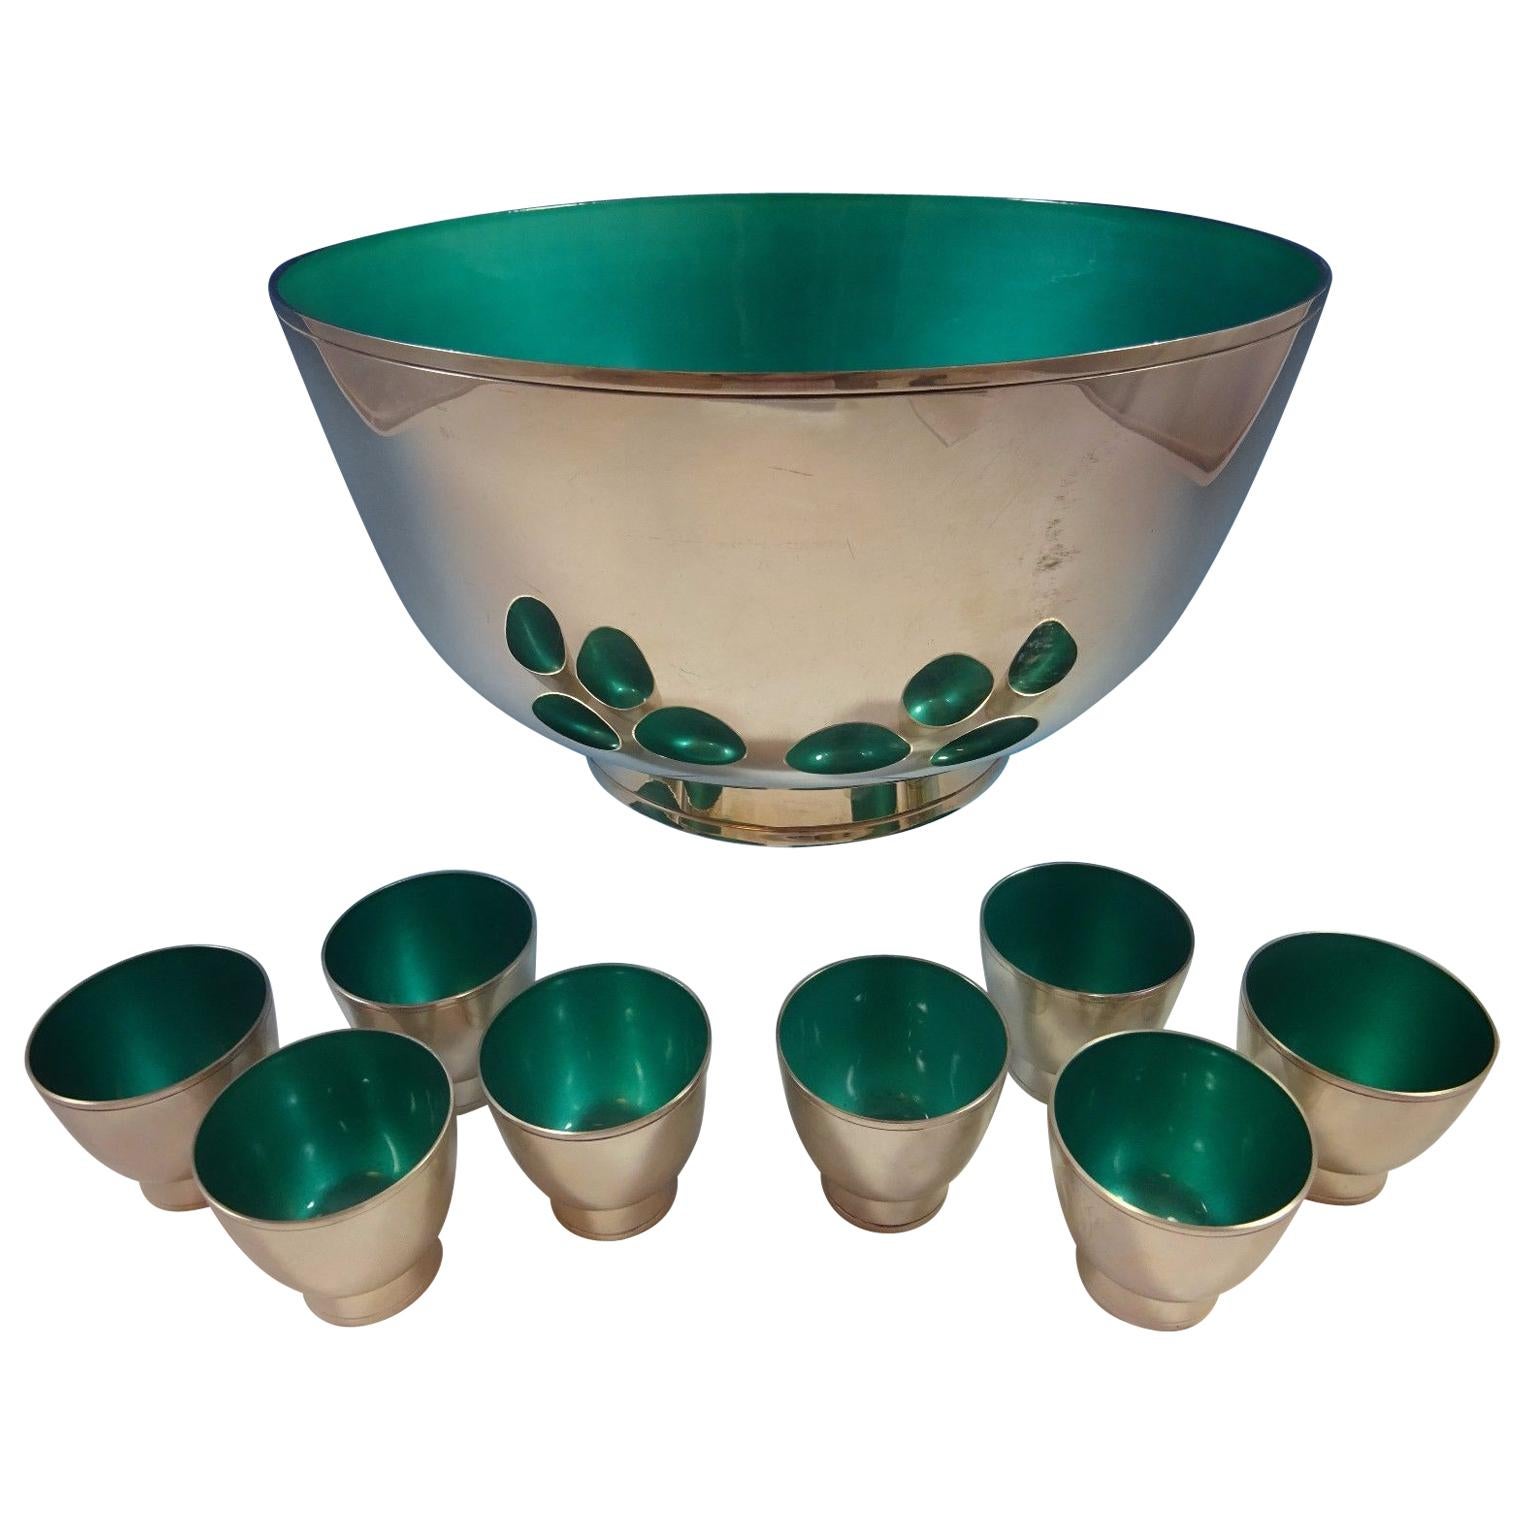 Towle Sterling Silver Punch Bowl and Cups with Turquoise Enamel